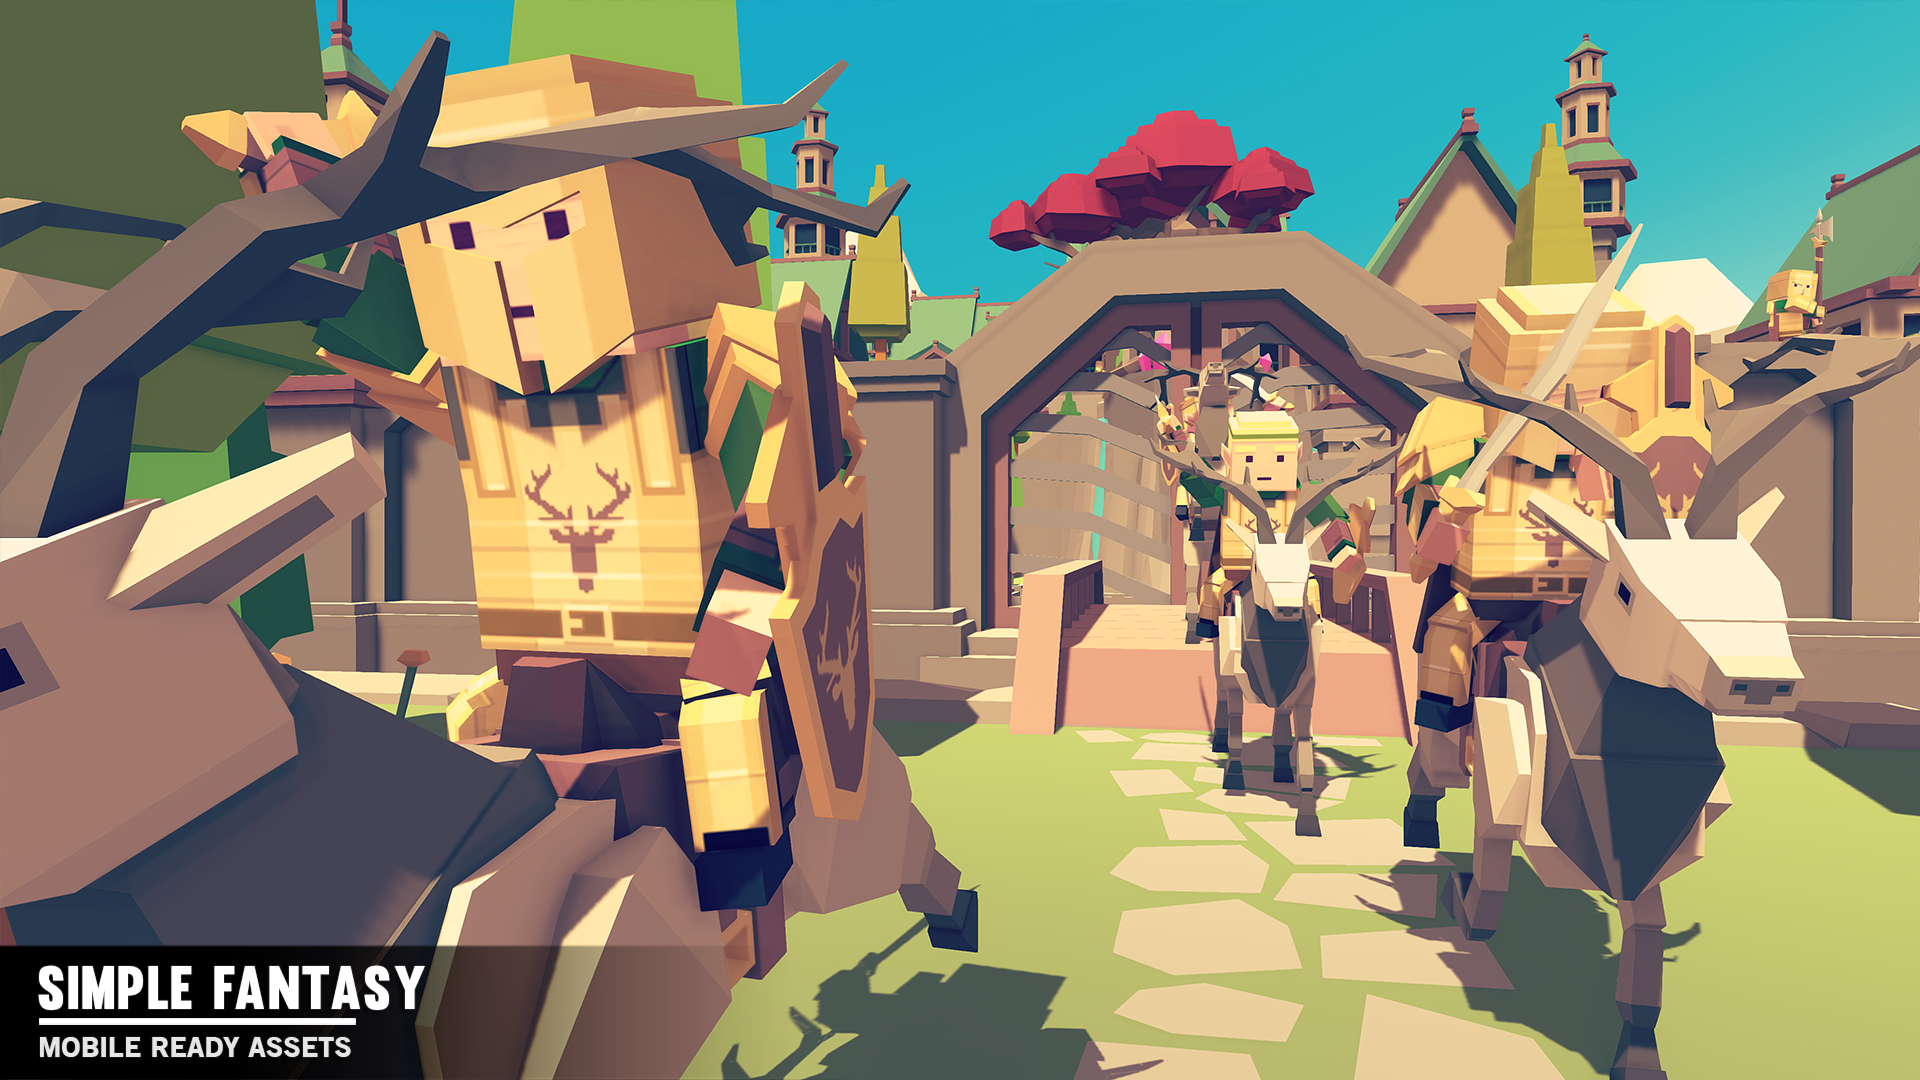 Low poly fantasy character assets for game development